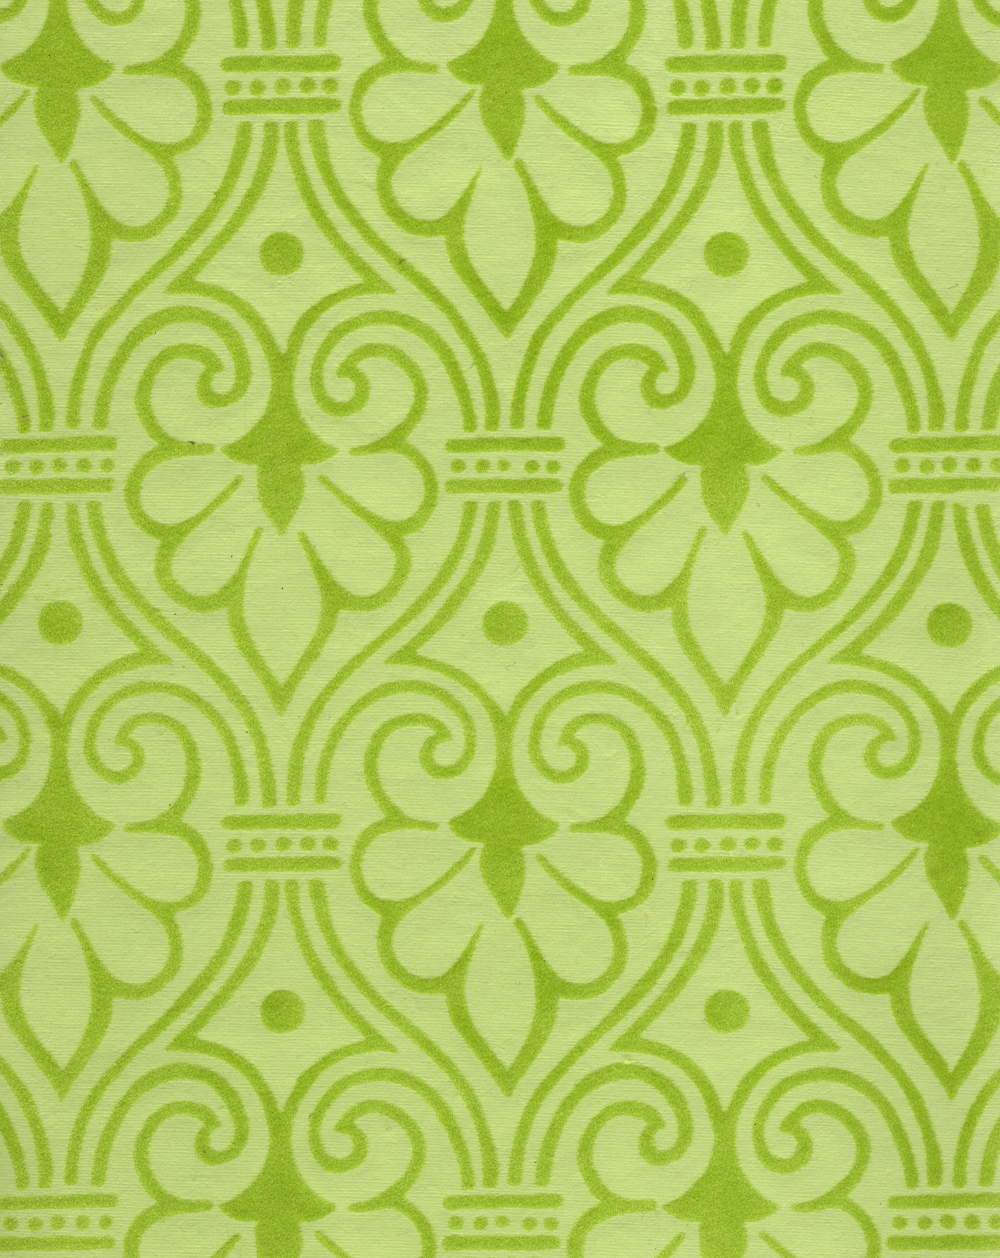 Green Old-fashioned paper, Antique, Backgrounds, Designelement, Distressed, HQ Photo